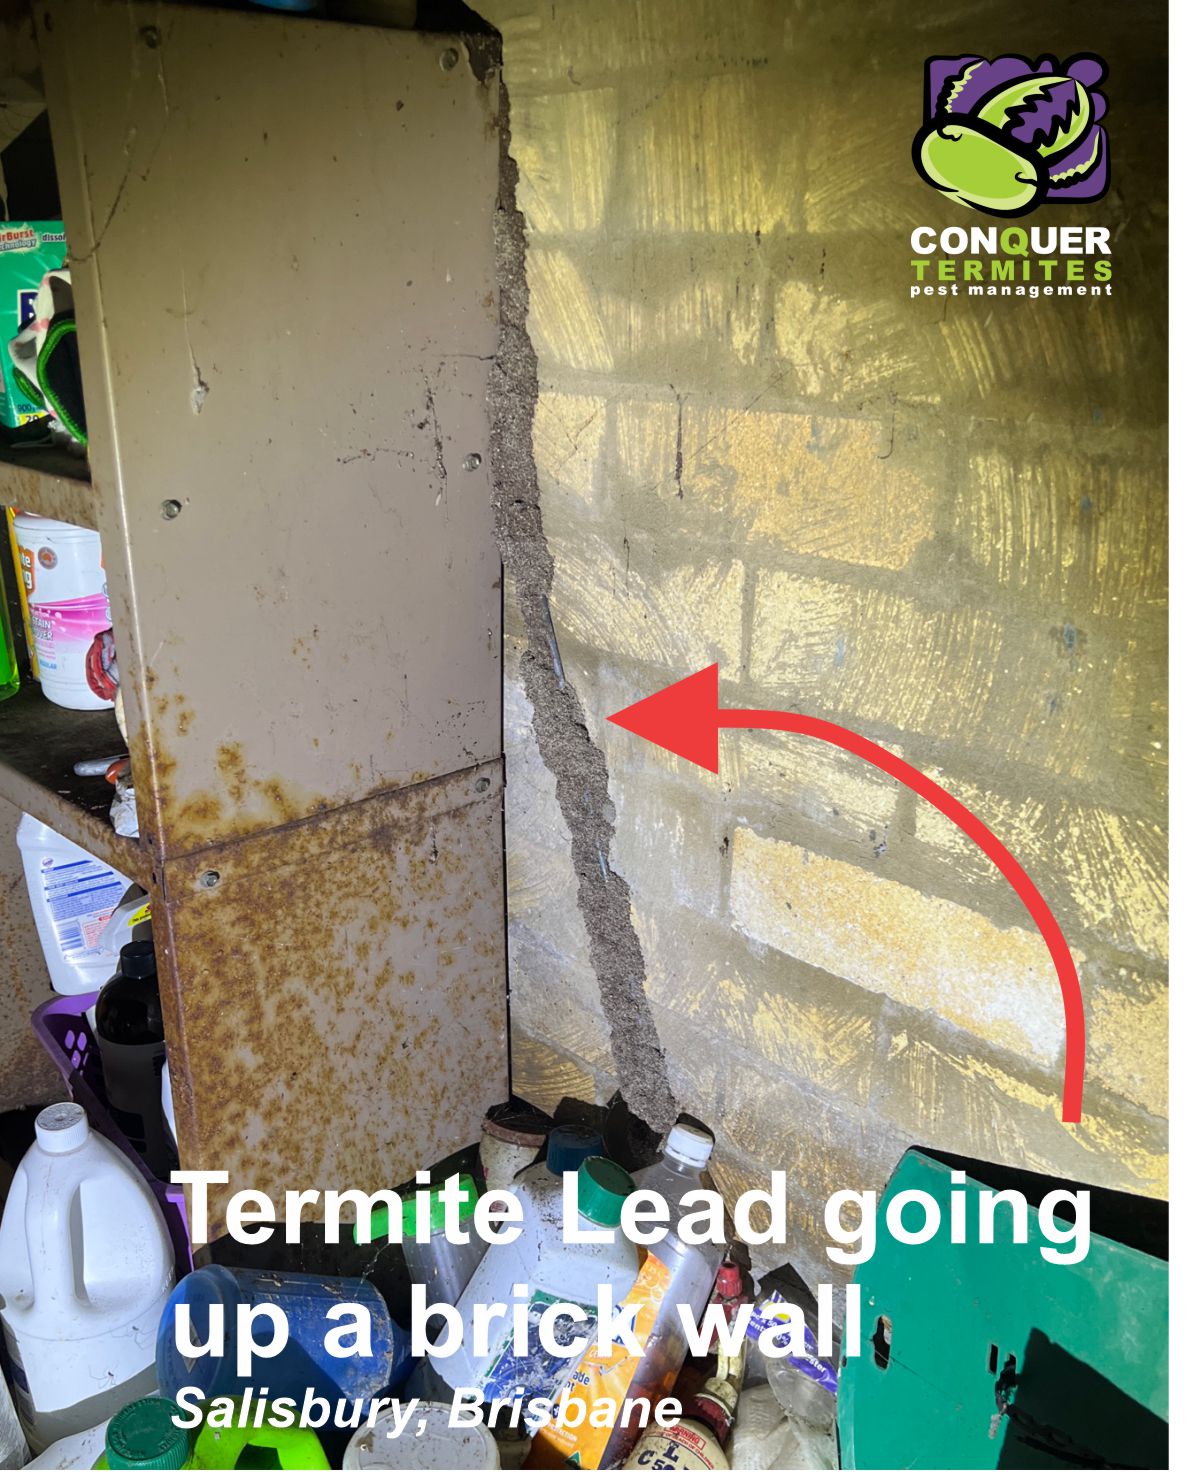 Termites also climbed and followed a wire up the brick wall to get into the house